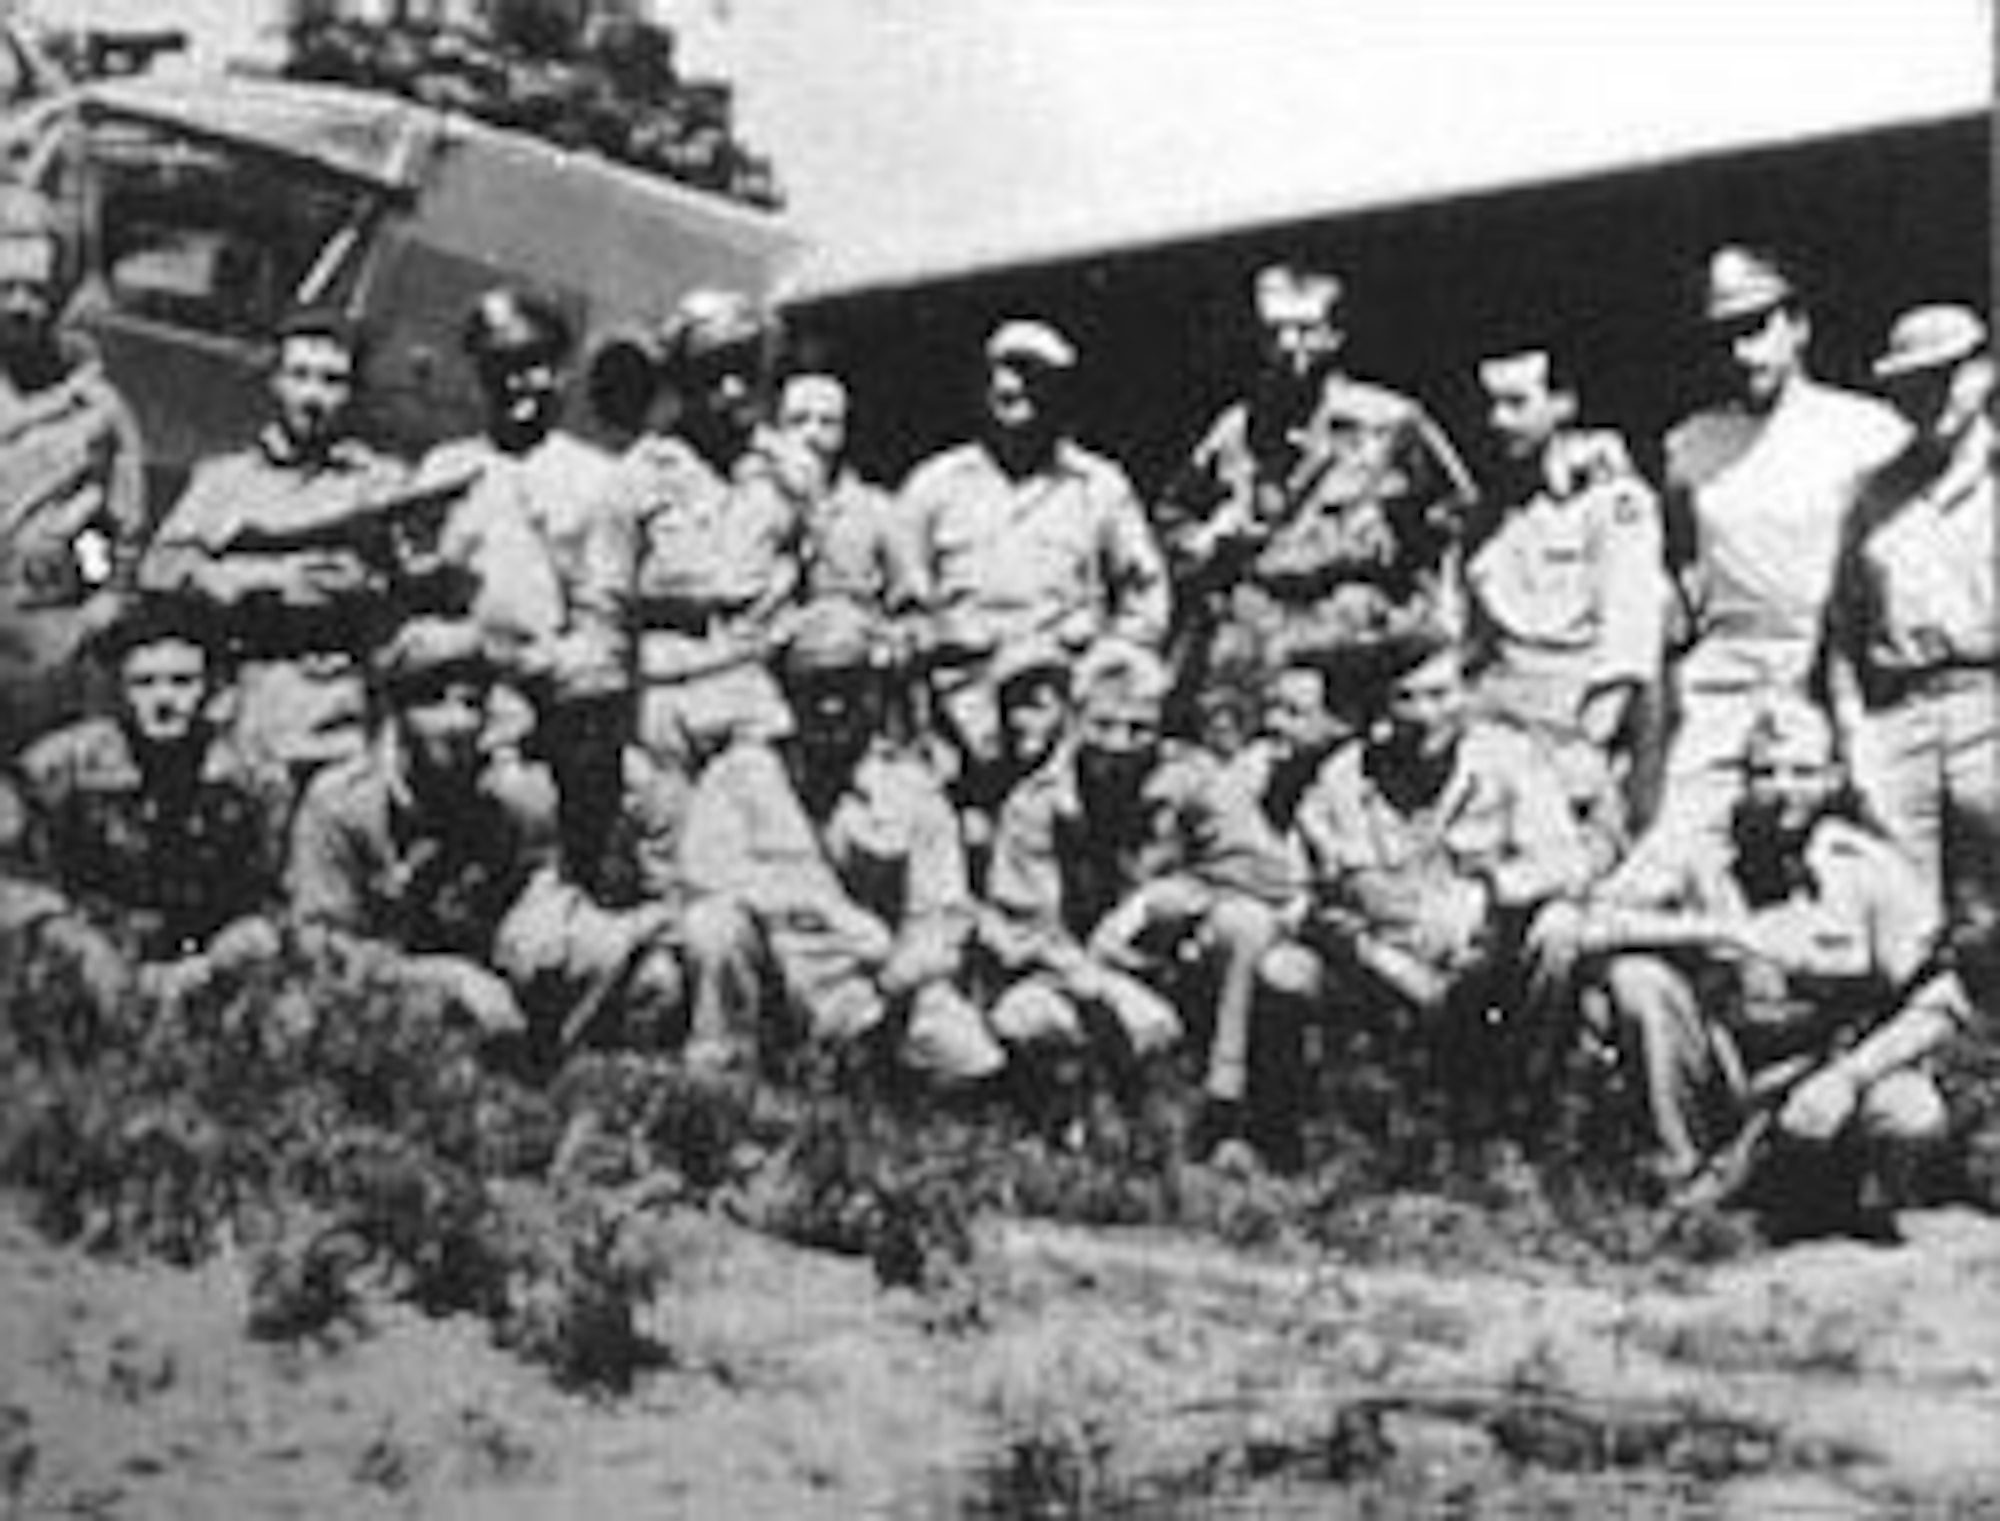 Members of the 1st Air Commando Group in India just before taking off on the glider invasion of Burma. Jackie Coogan is kneeling at right with gun on left arm. In rear is a CG-4A glider. (U.S. Air Force photo)